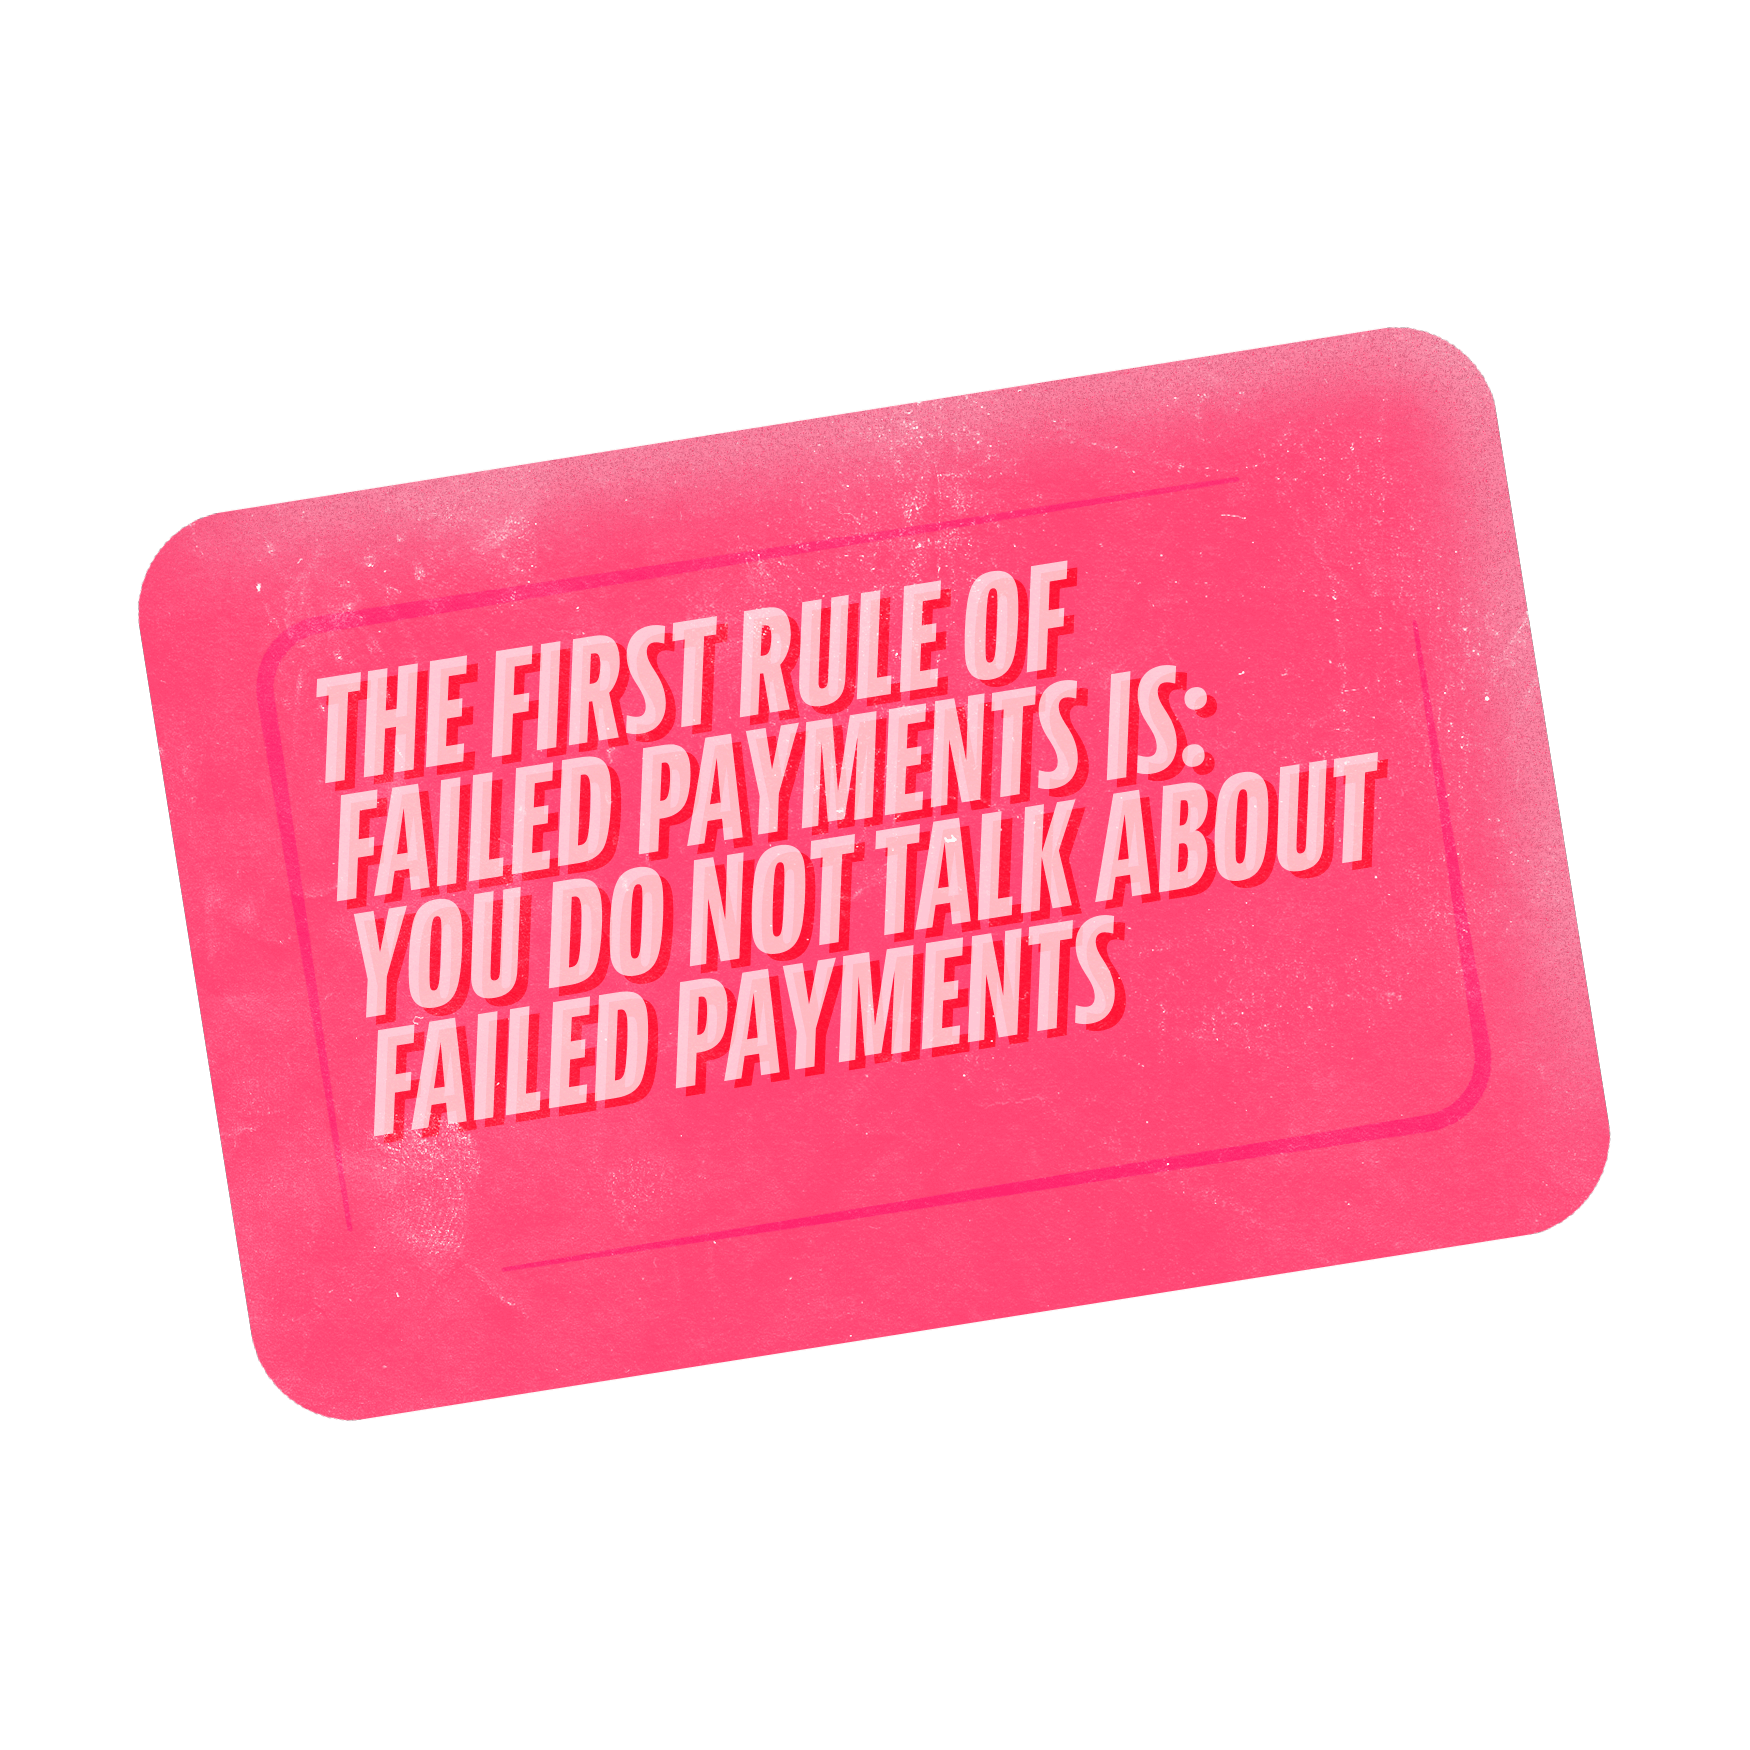 Break the rules - talk about failed payments